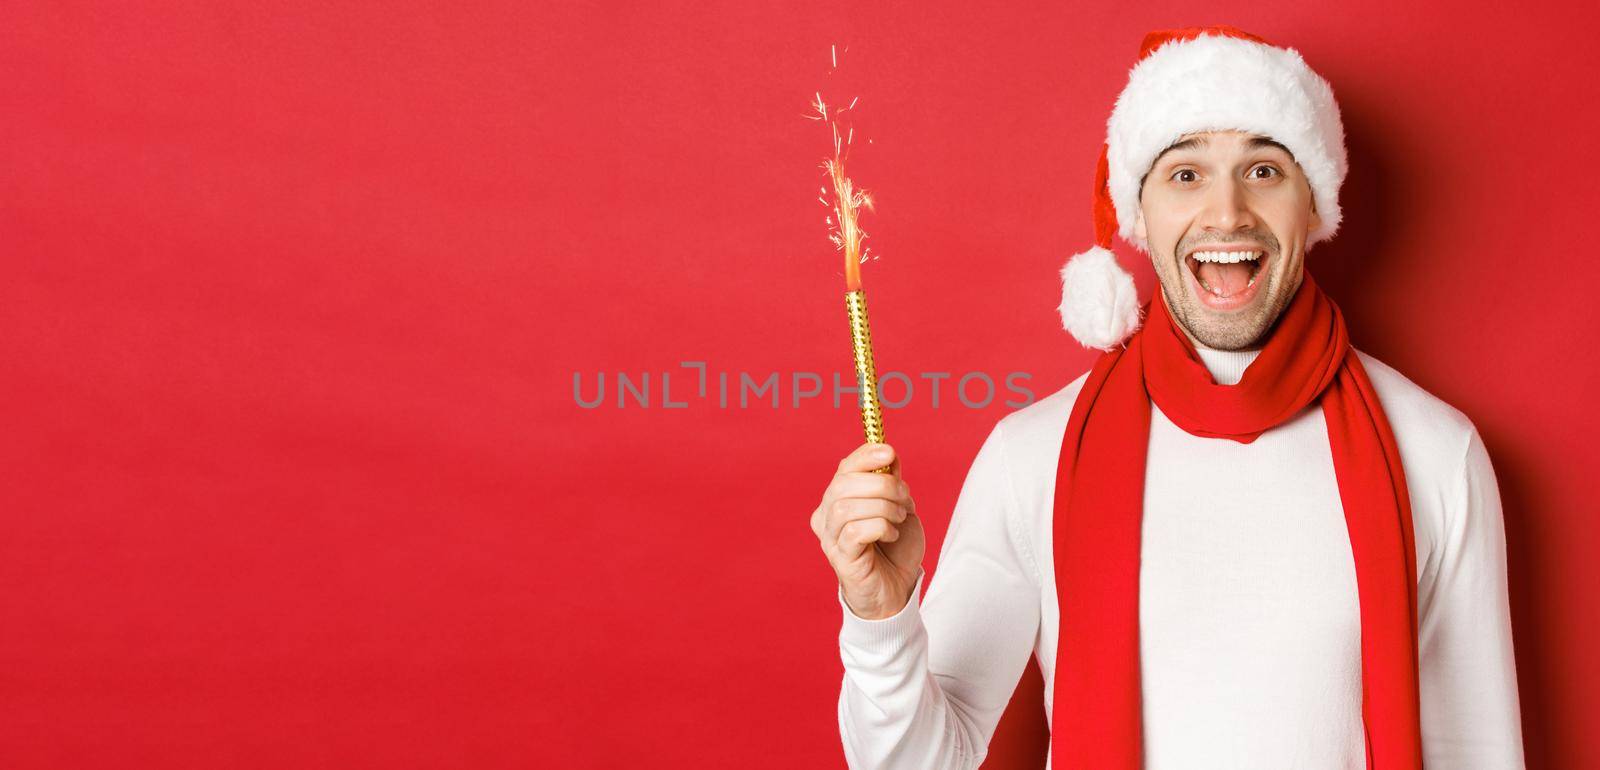 Concept of christmas, winter holidays and celebration. Handsome man celebrating new year and having fun, holding sparkler and smiling, wearing santa hat, standing over red background.